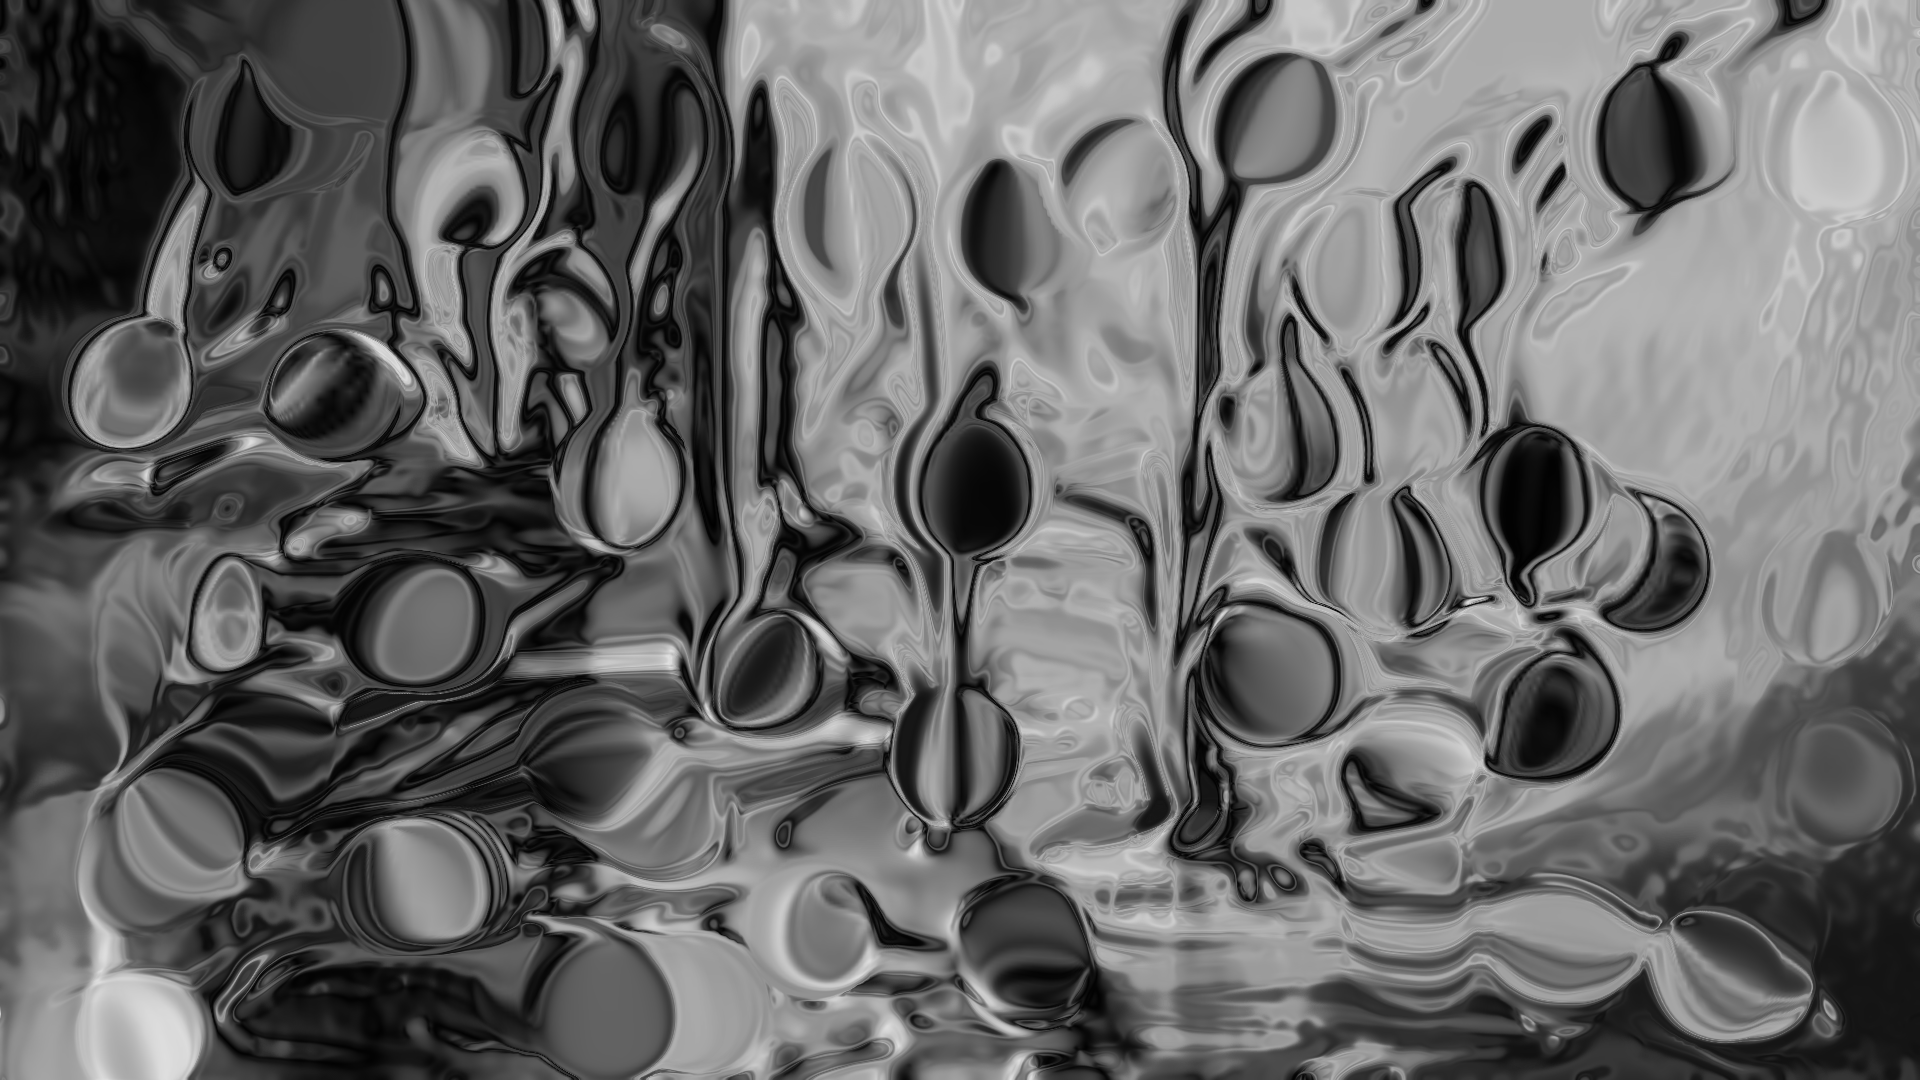 Abstract Water Drops by lonewolf6738 by lonewolf6738